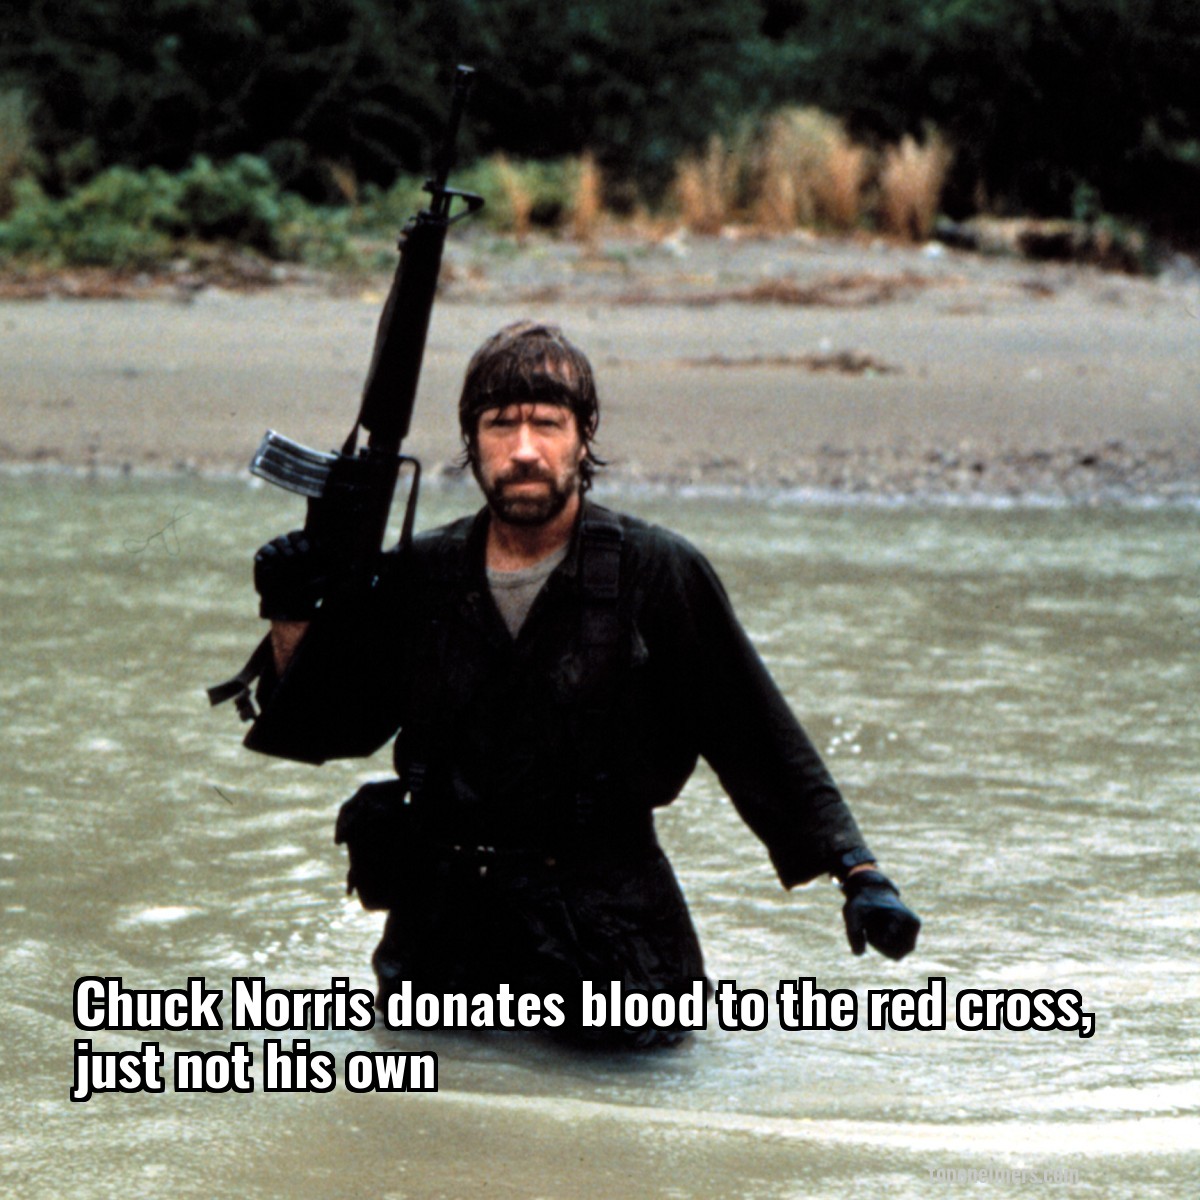 Chuck Norris donates blood to the red cross, just not his own